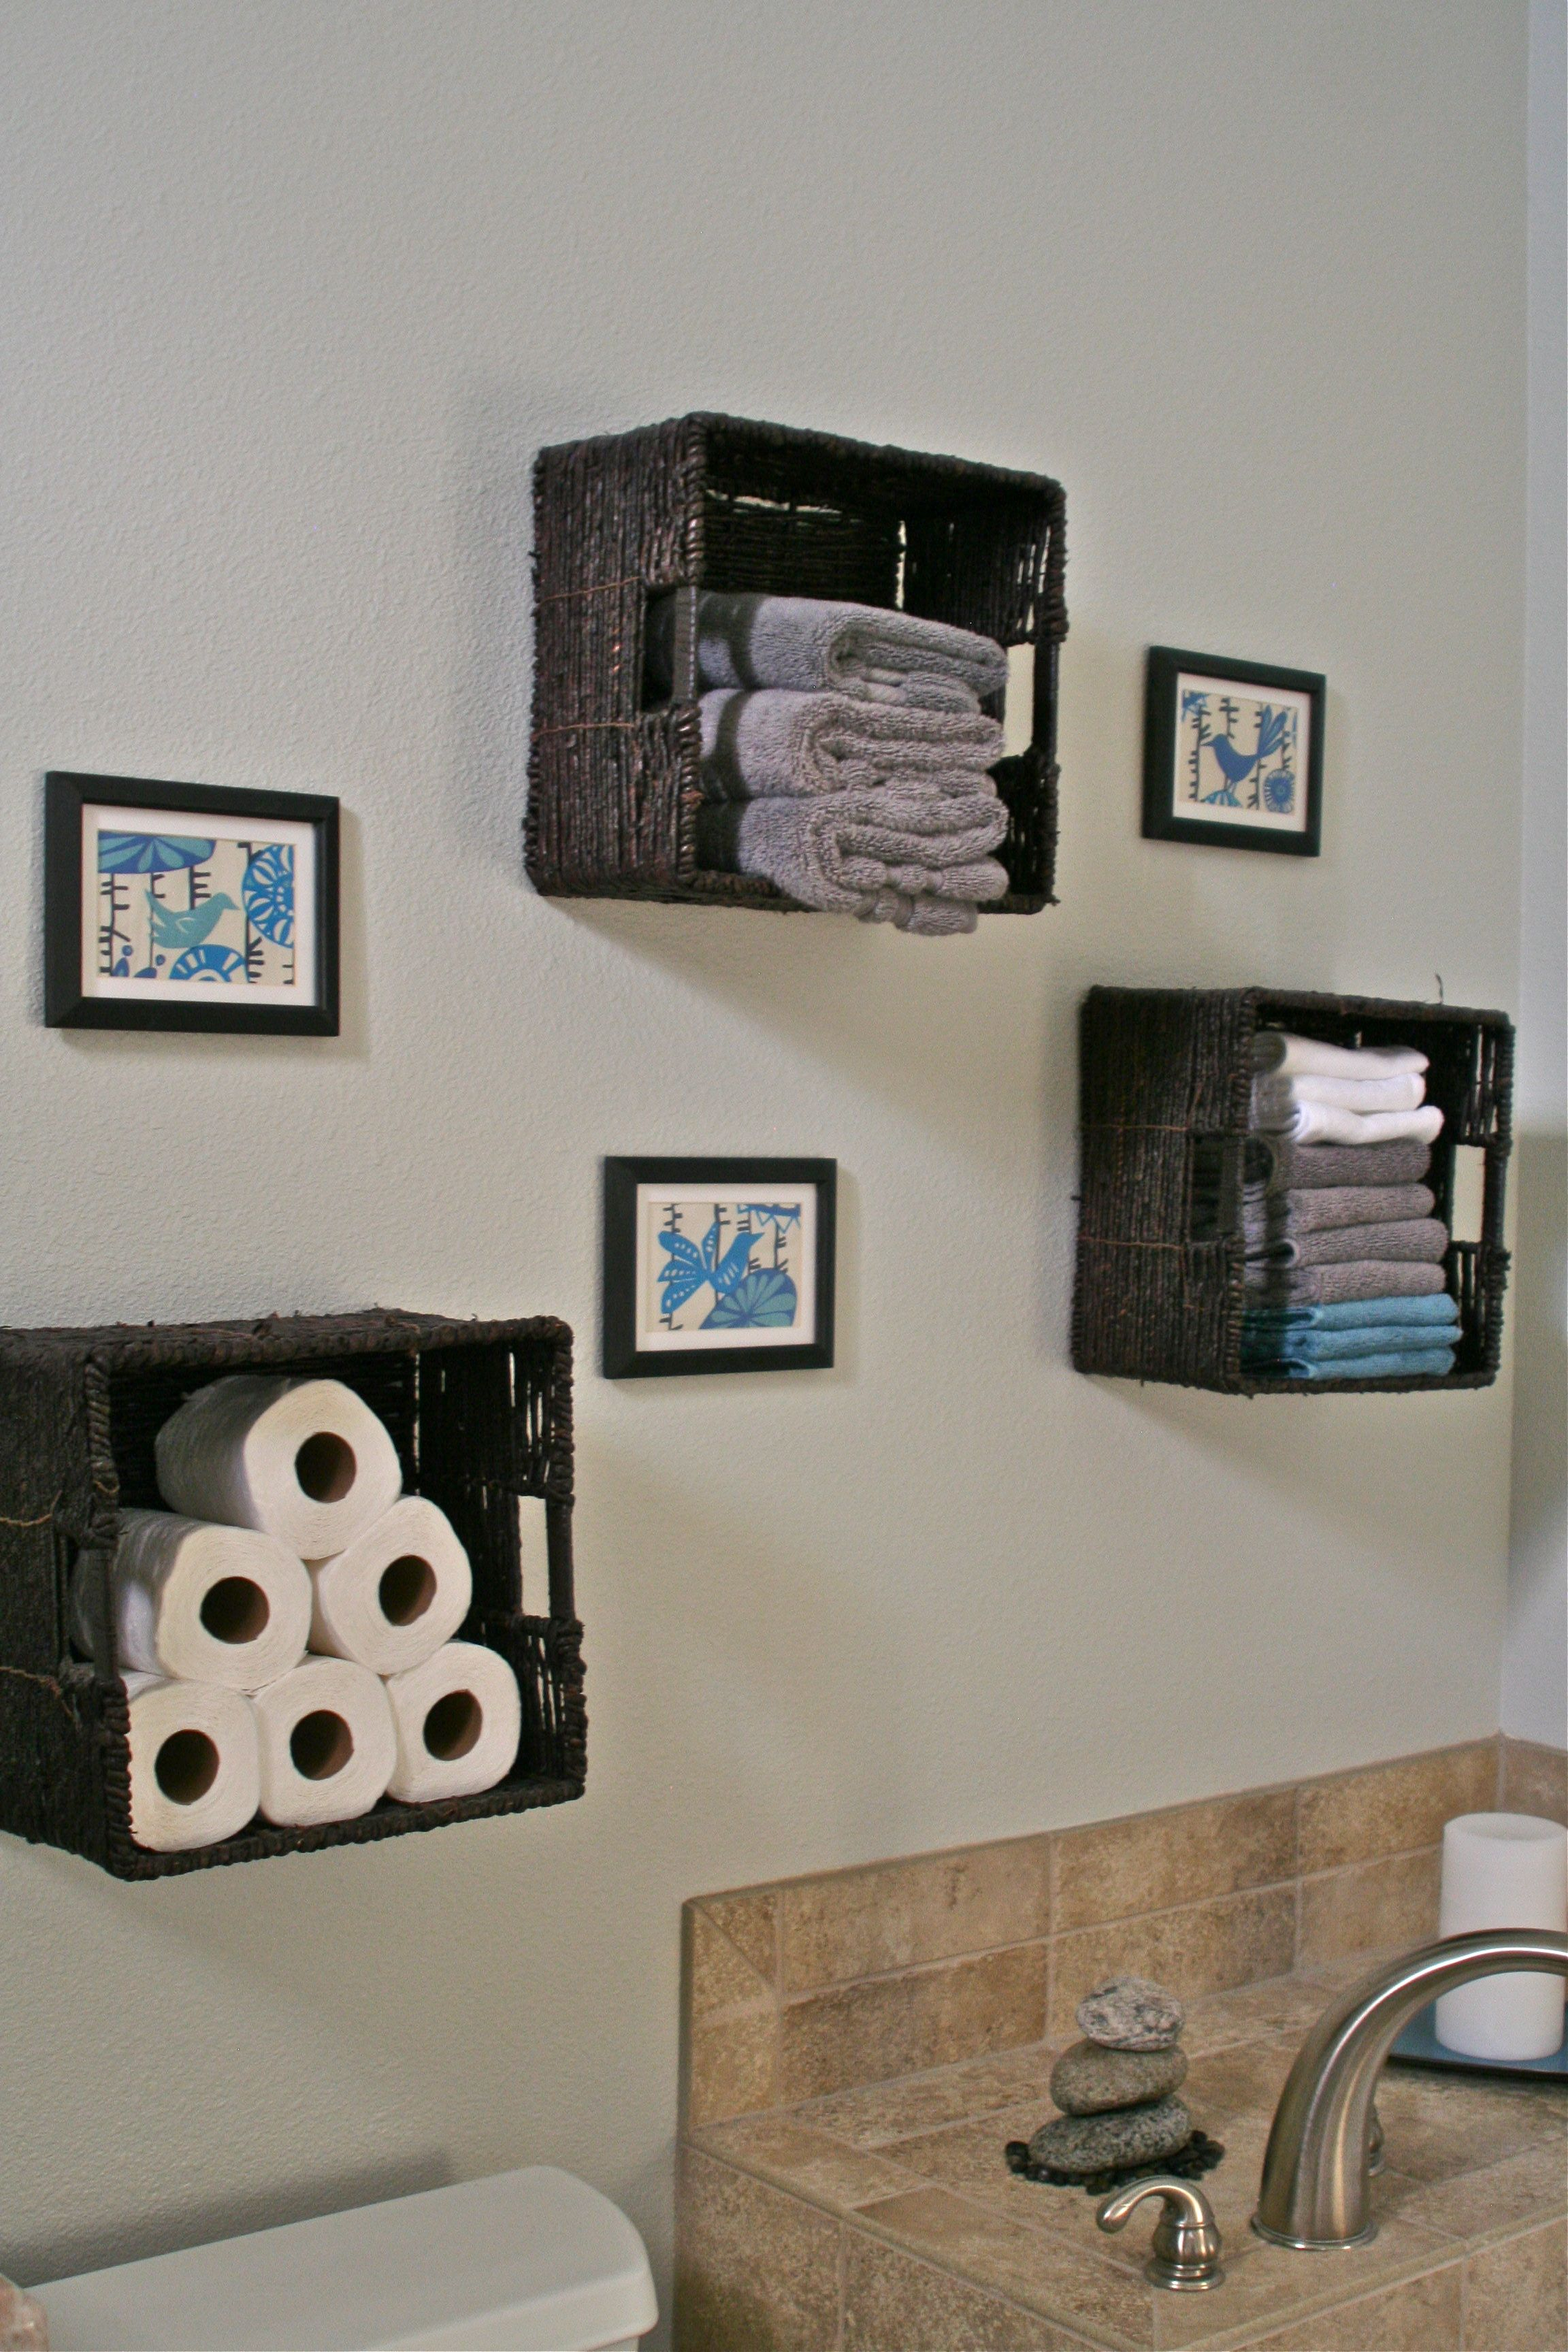 Bathroom Storage Baskets For Towels Toilet Paper Etc Love with proportions 2304 X 3456